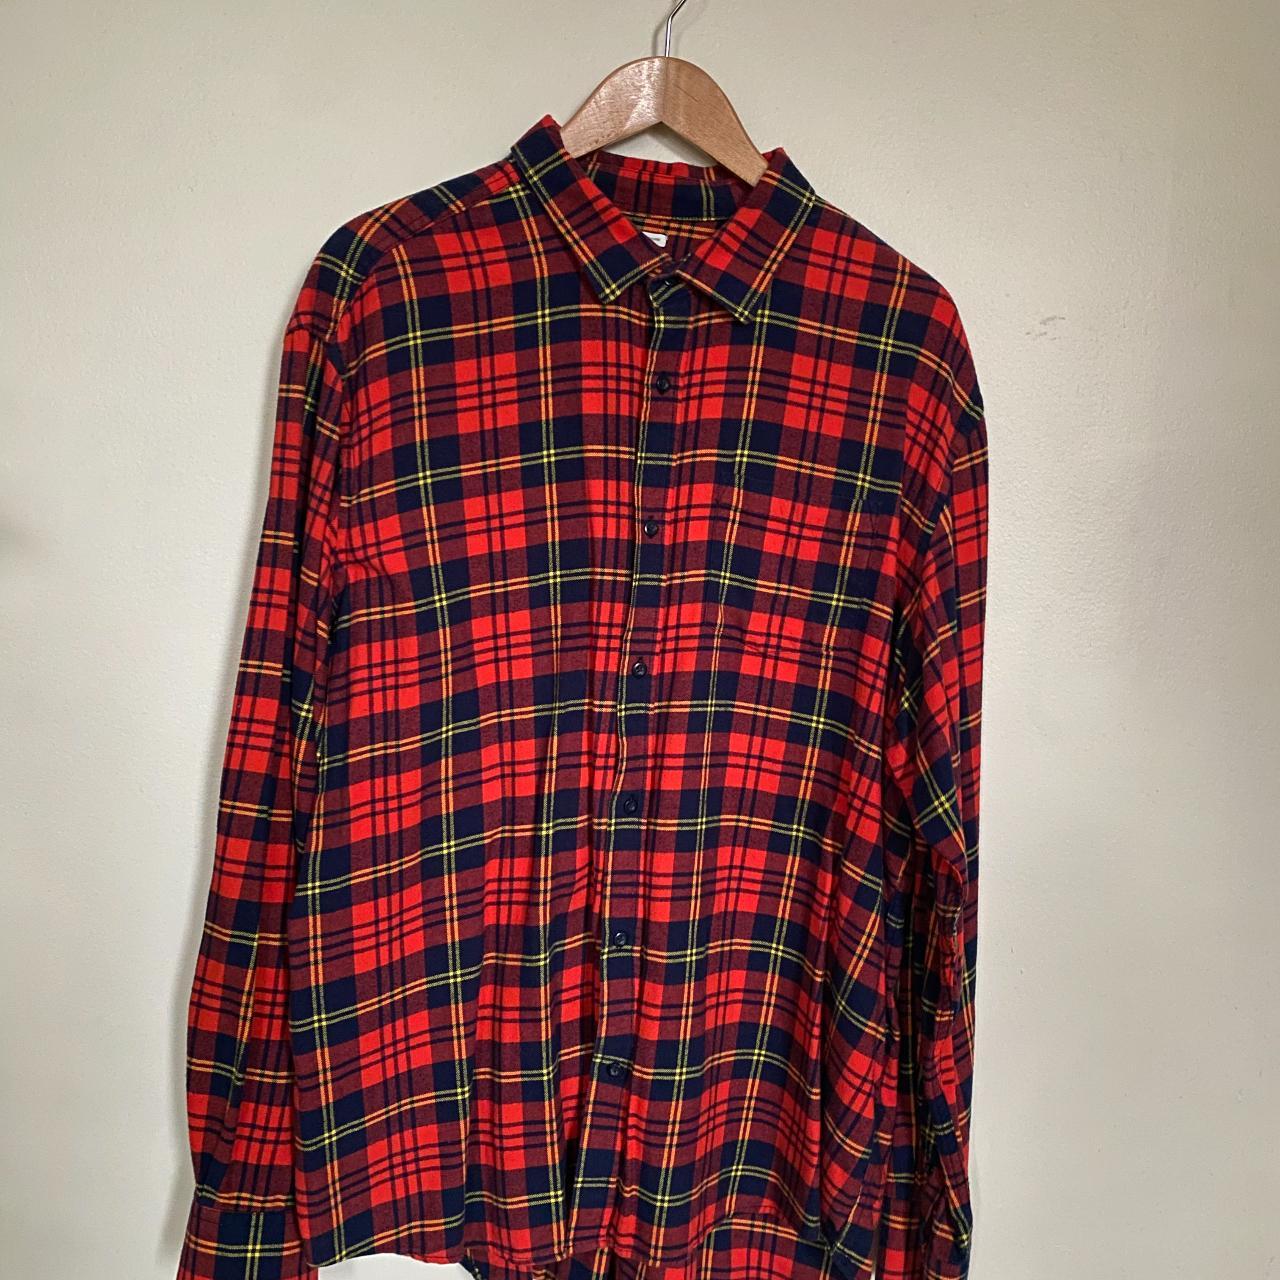 Old Navy Plaid Flannel Shirt in cotton - Depop